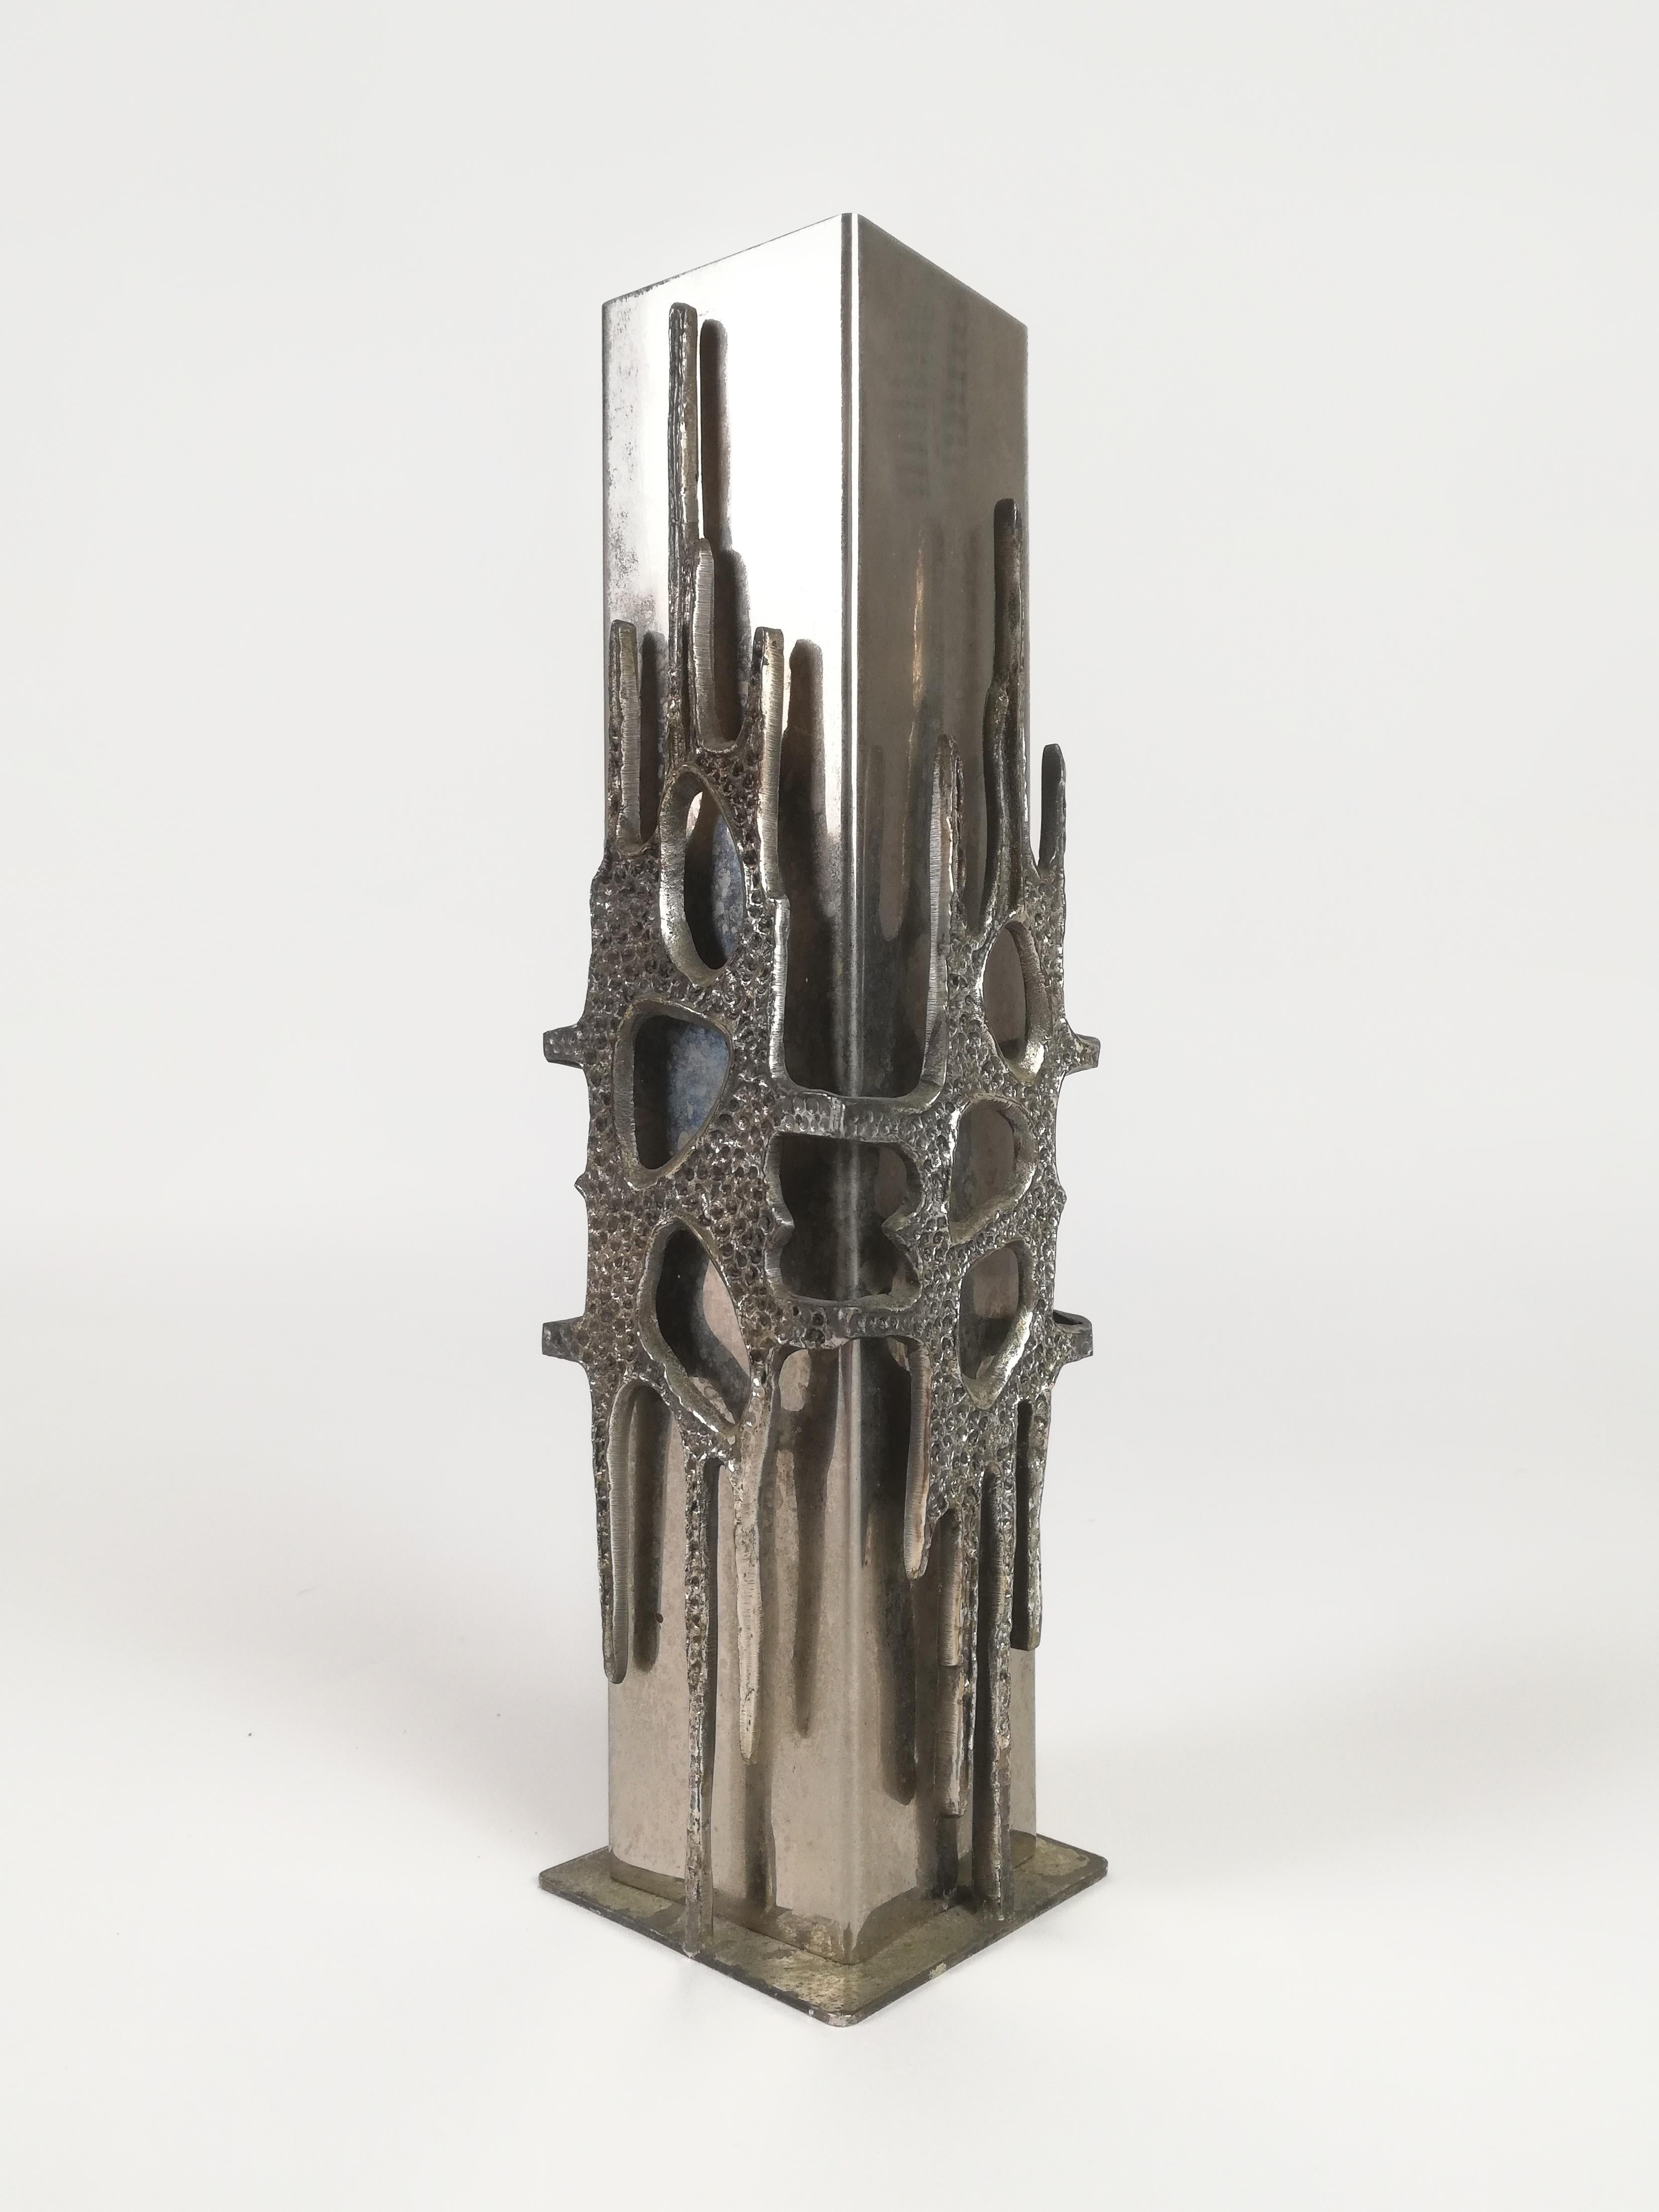 Brutalist Italian Steel Vase in the Style of Luciano Frigerio, Italy 1970s For Sale 4